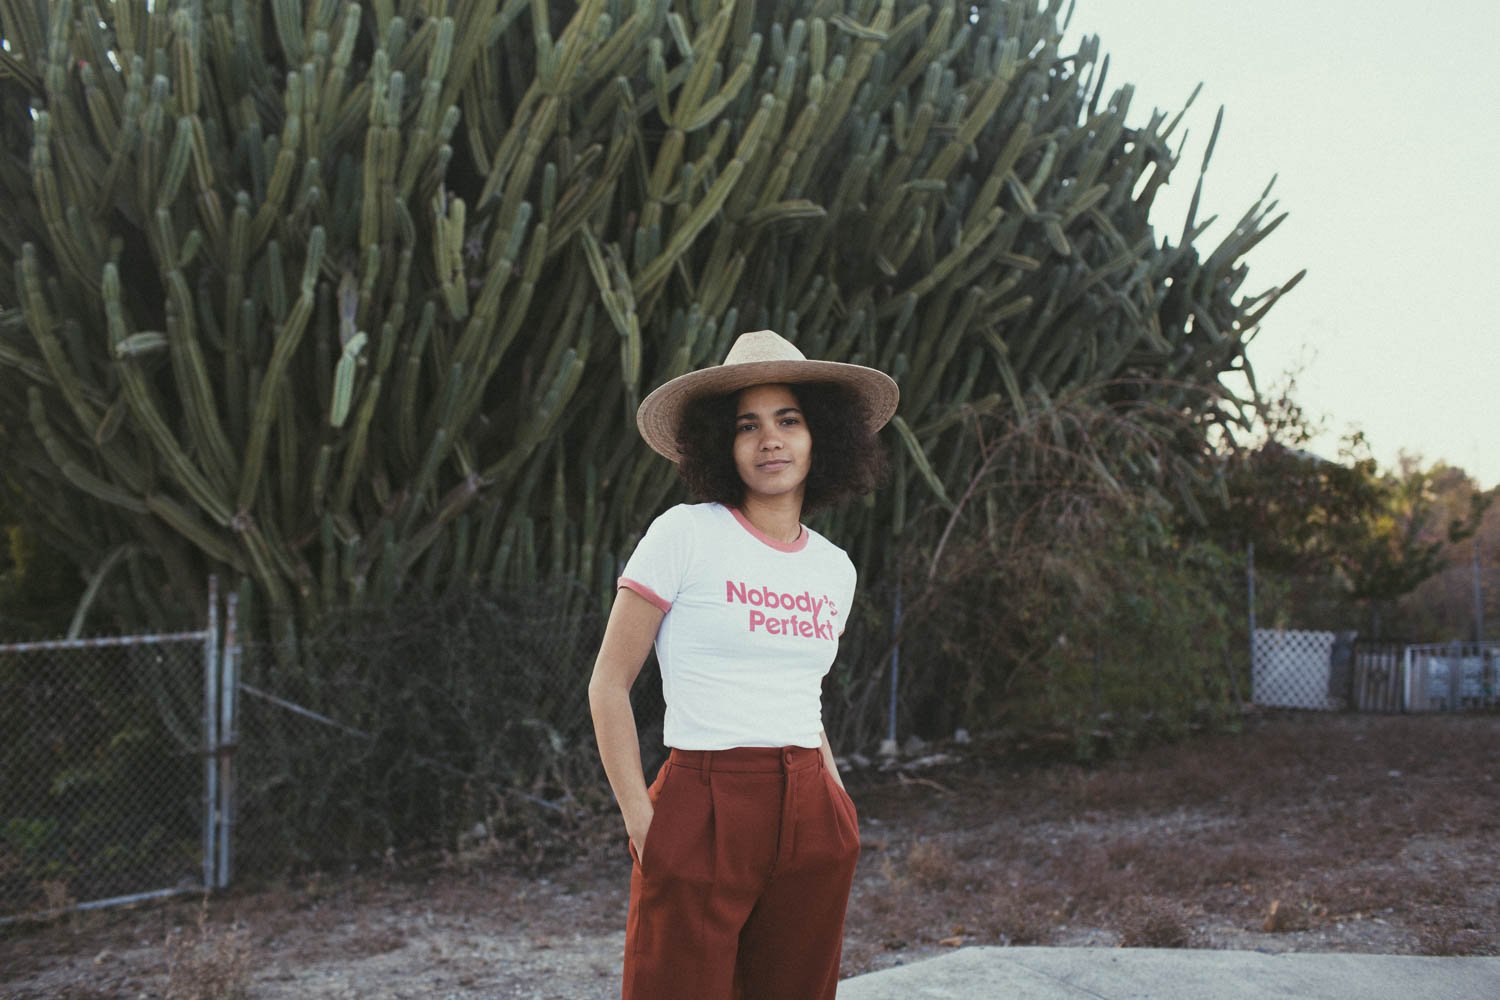 Woman in a hat and t-shirt that says "Nobody's Perfekt" stands against a background of trees